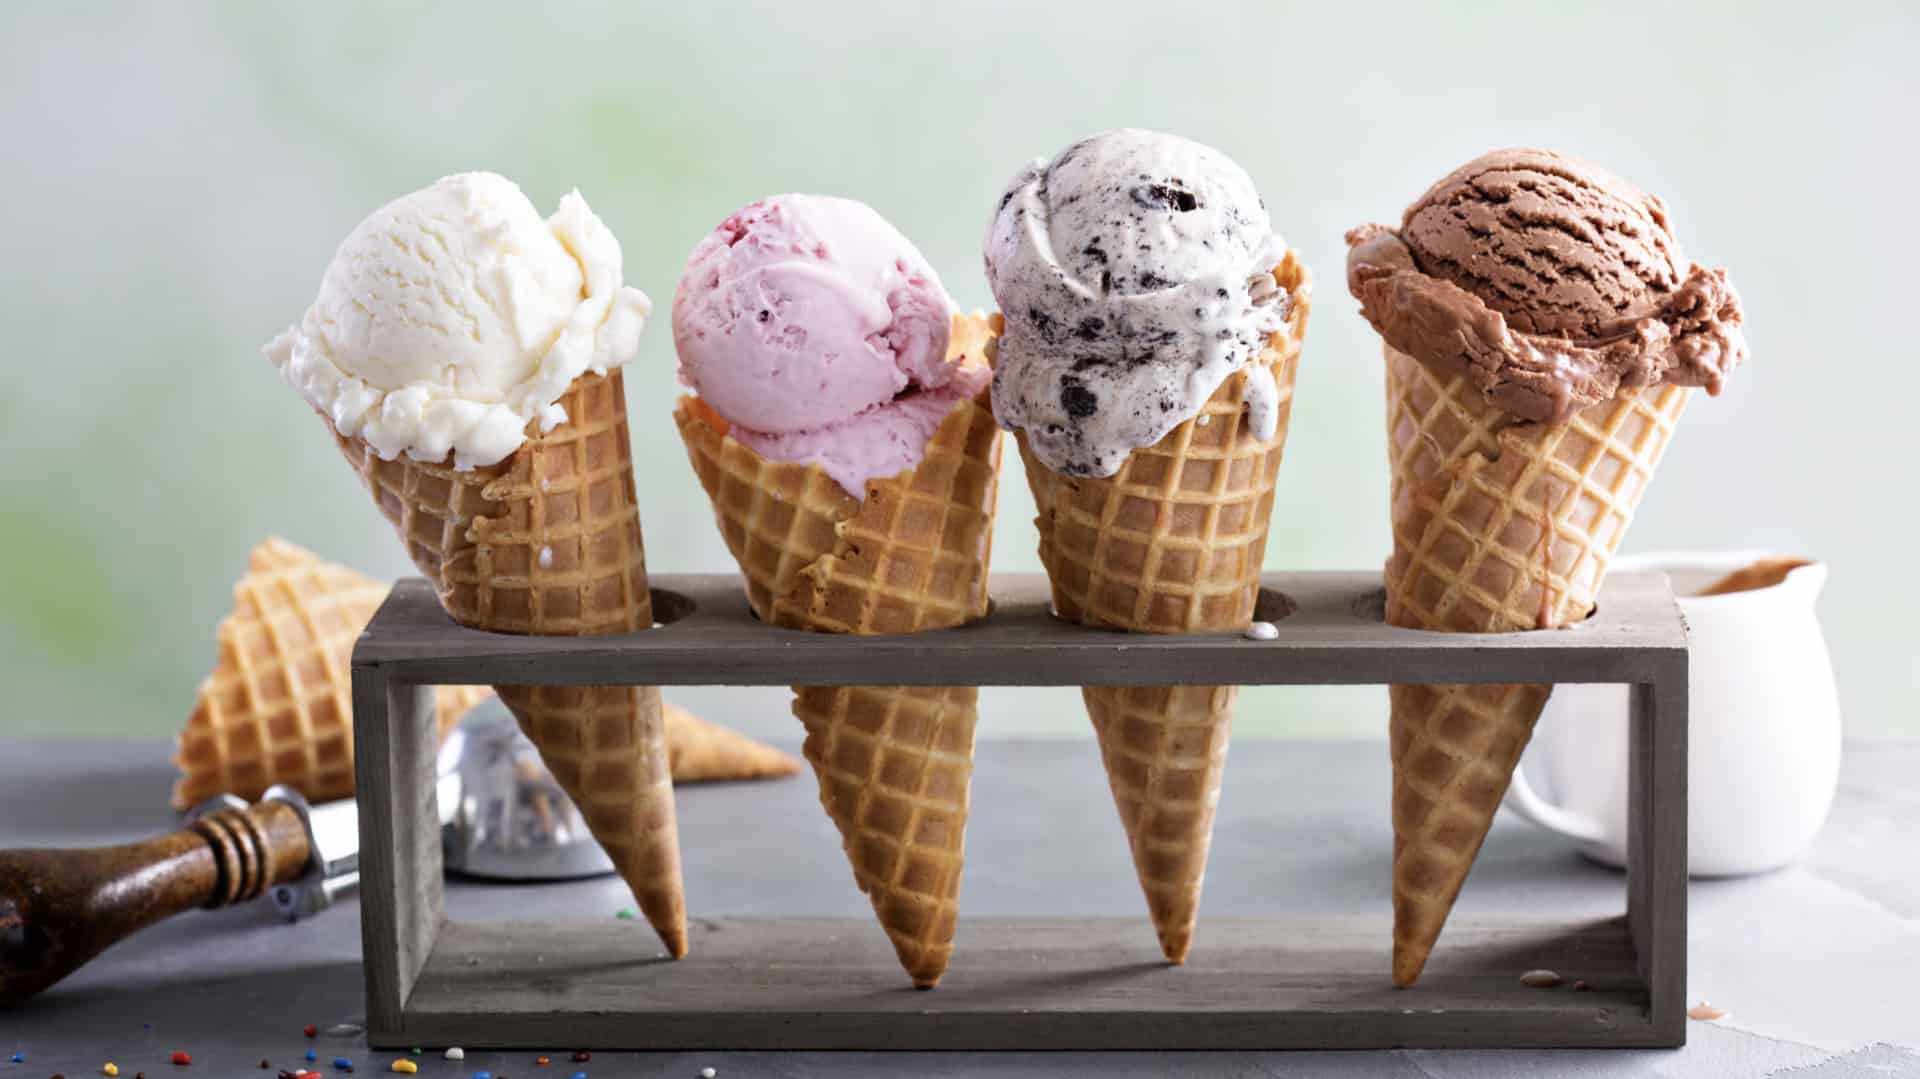 a variety of ice cream scoops in cones with chocolate, vanilla and strawberry